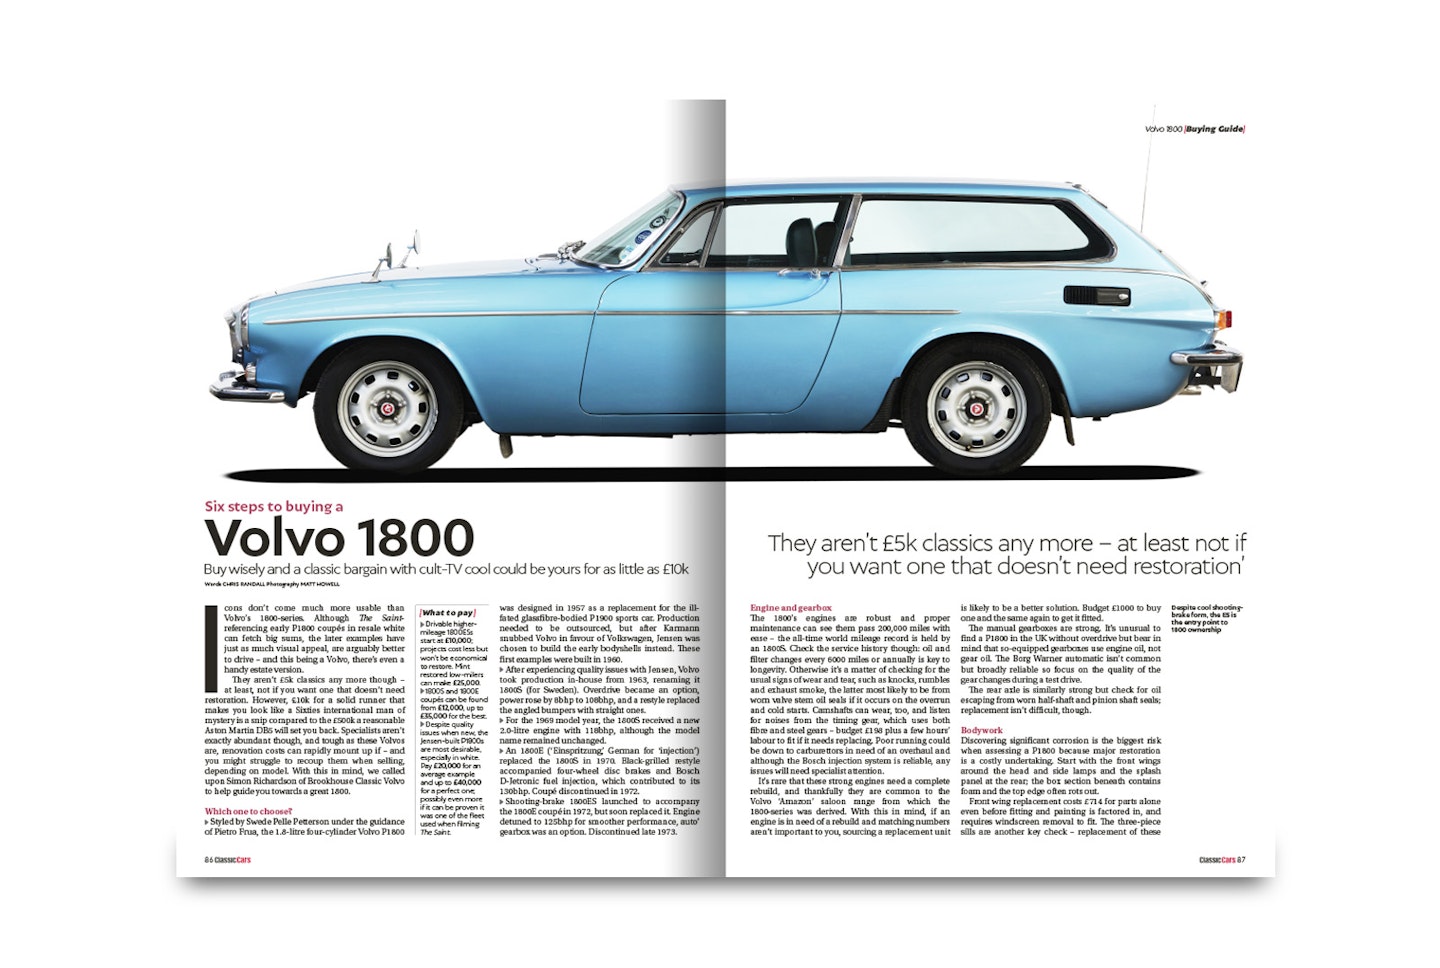 p86 Buying Guide Get yourself into an iconic Volvo 1800-series for as little as £10,000